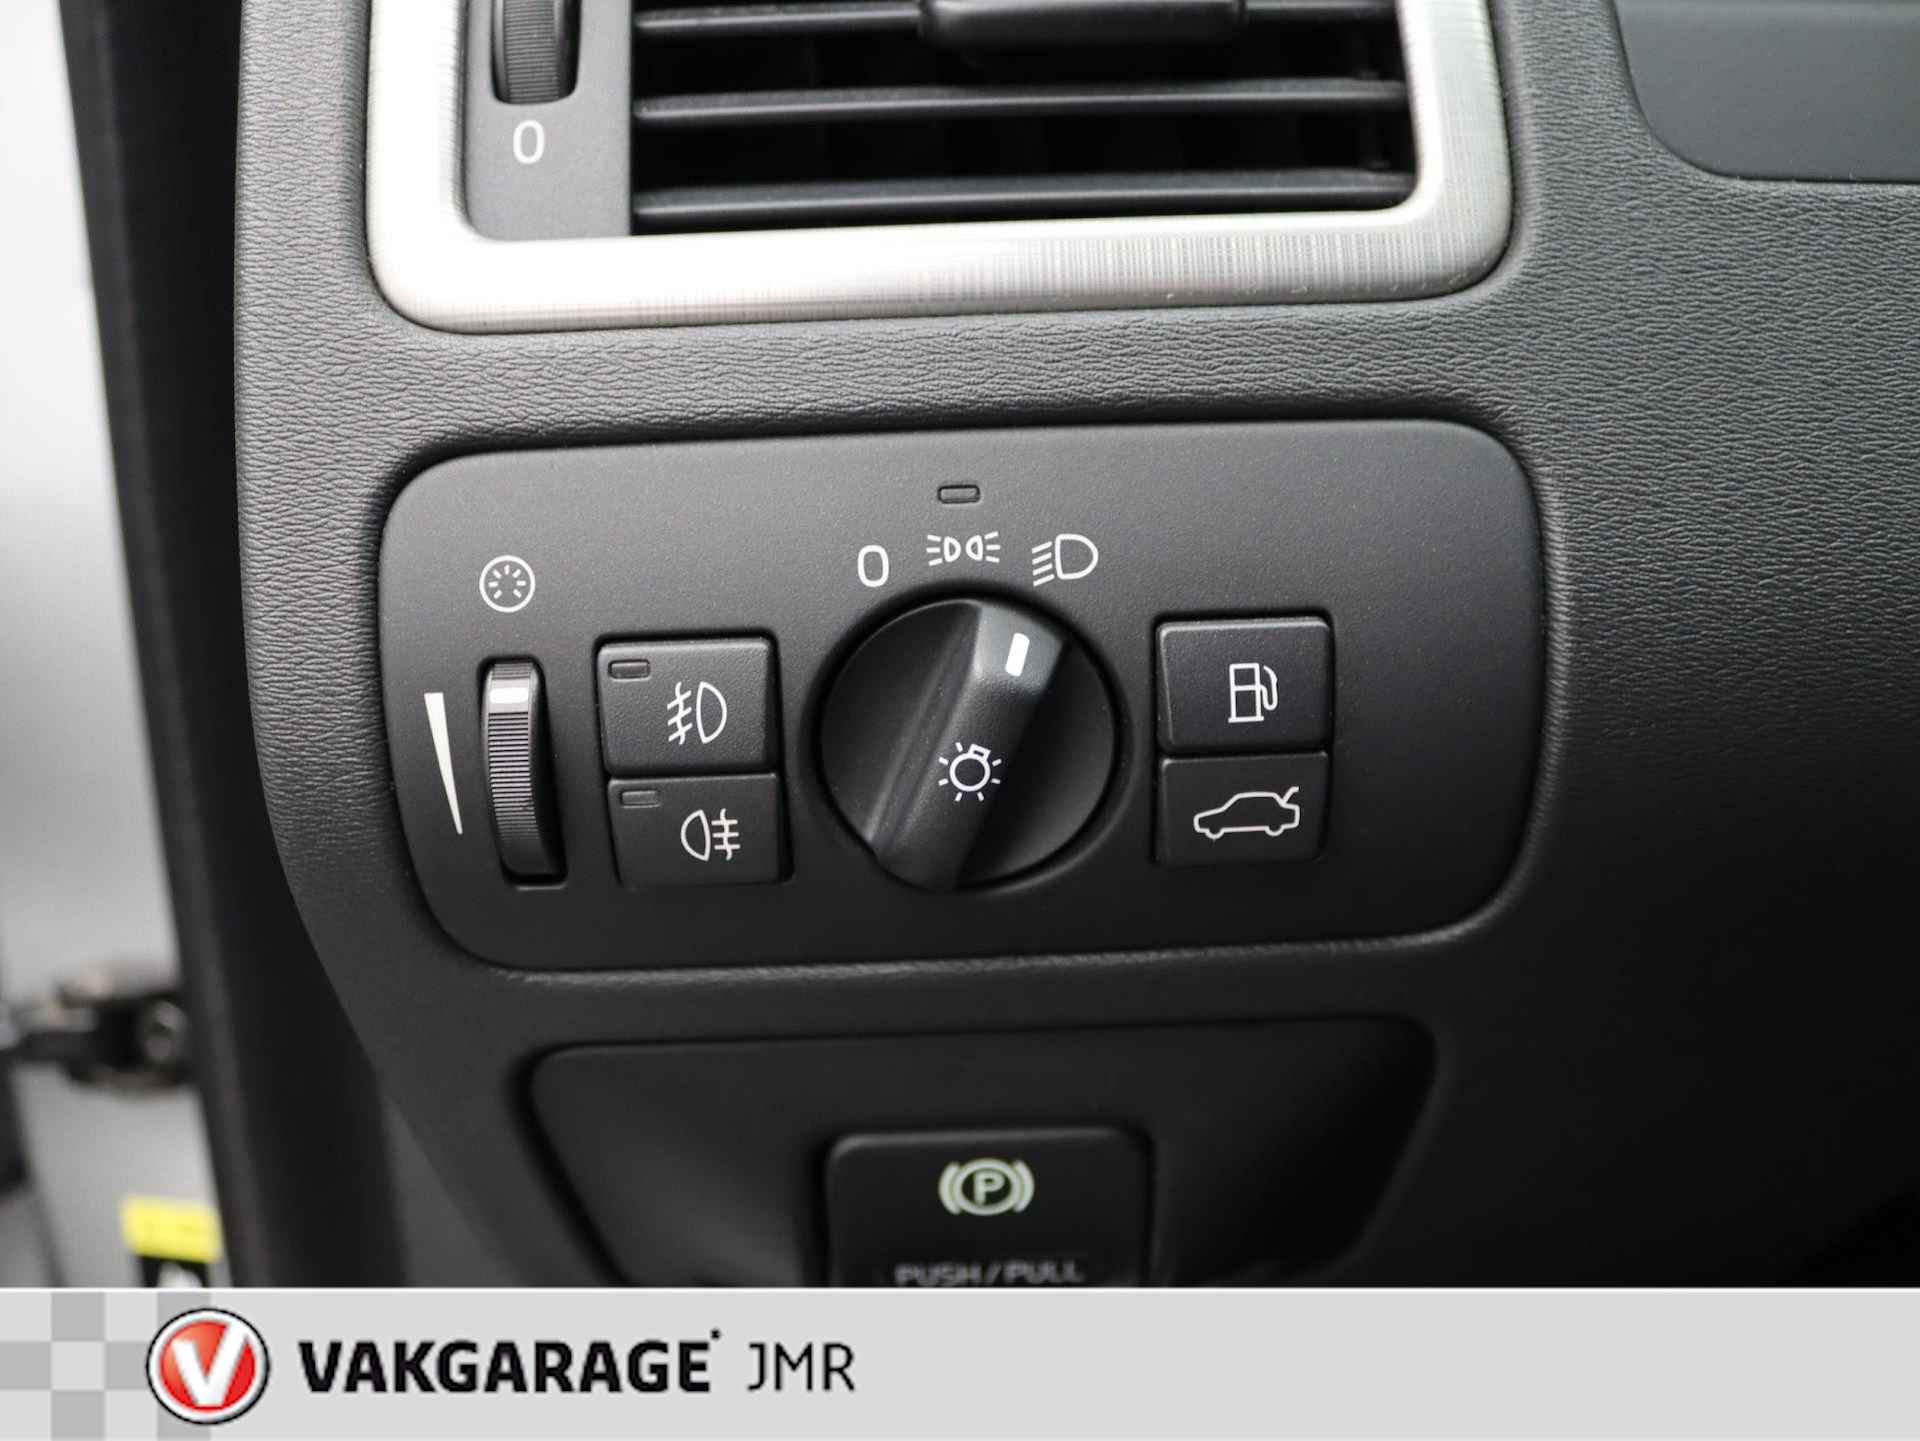 Volvo V70 2.5FT Momentum Youngtimer Trekhaak - PDC Achter - Stoel + Achterbank verwarming - Bluetooth - Climate en Cruise Control - 21/39